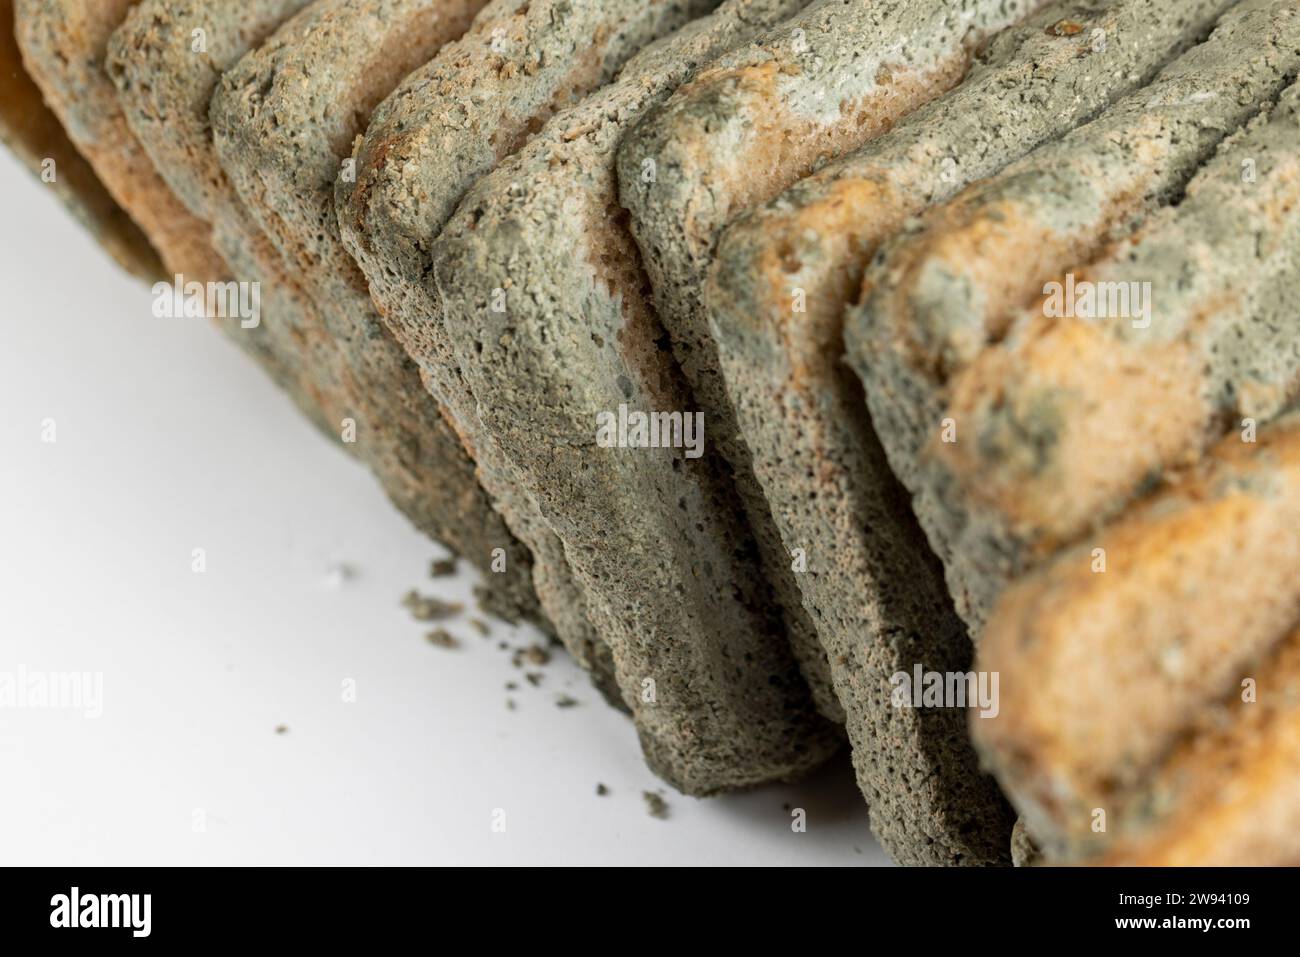 dangerous pieces of bread covered with mold on the table, a loaf of bread made of wheat and rye flour spoiled by bacteria and mold Stock Photo